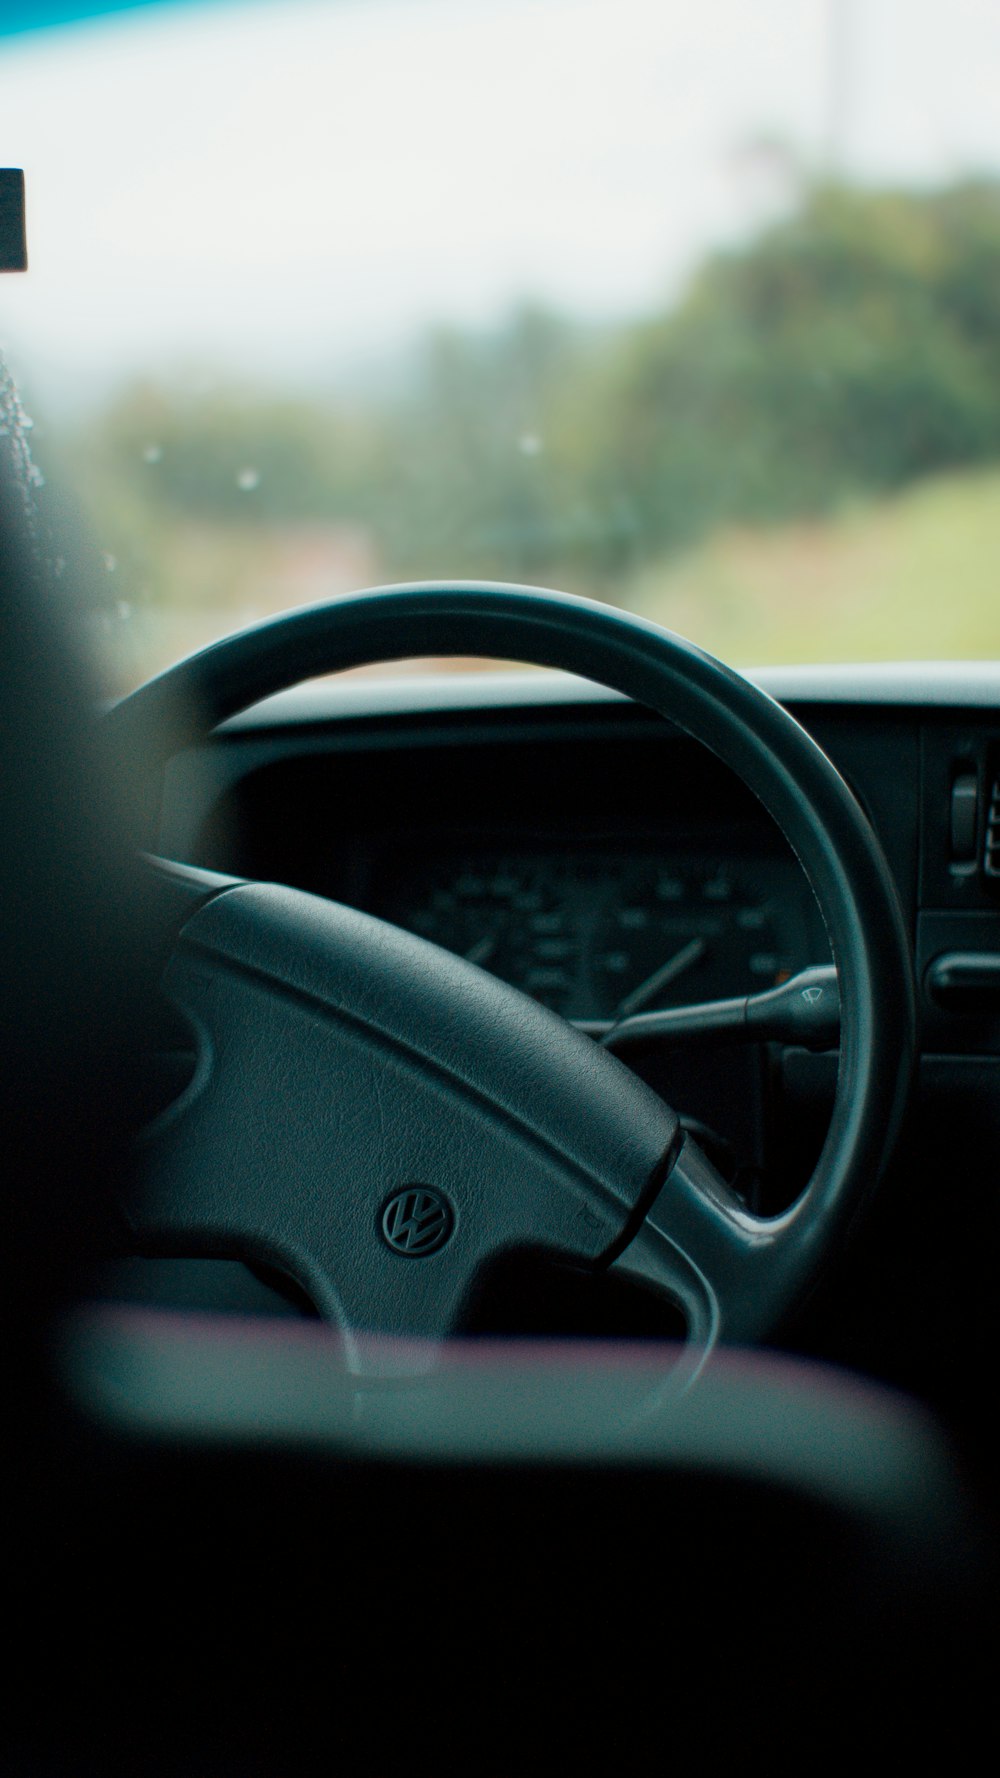 a view of a dashboard of a vehicle from inside the vehicle